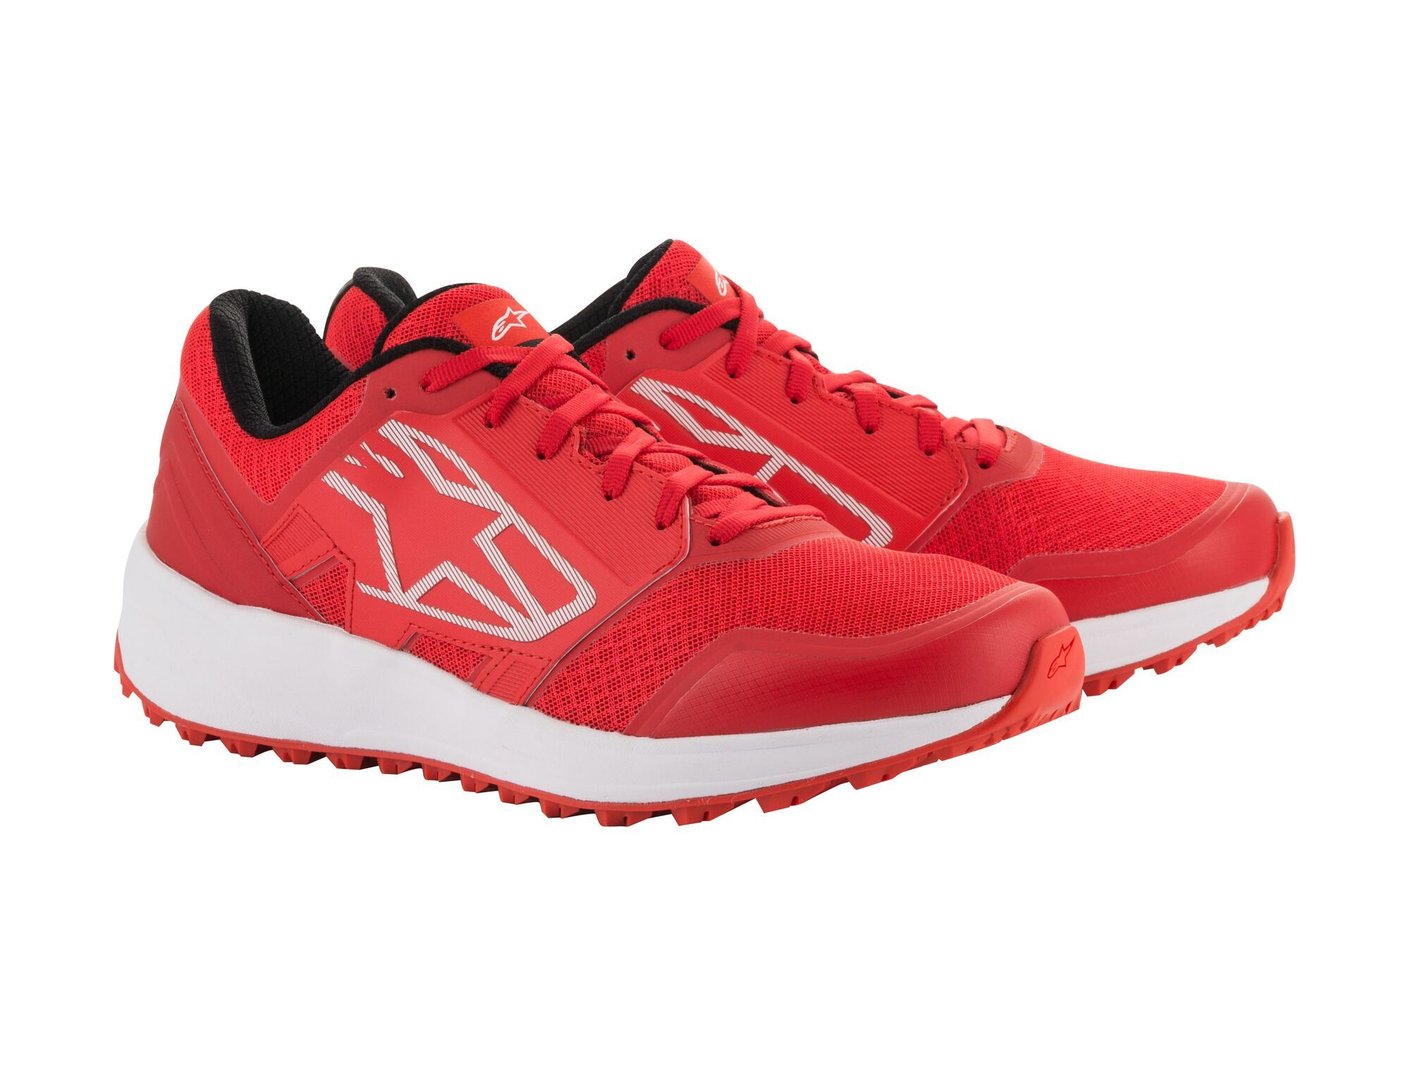 ALPINESTARS 2654820_32_10 META TRAIL RUNNING shoes, red/white, size 43 (10) (Фото-1)